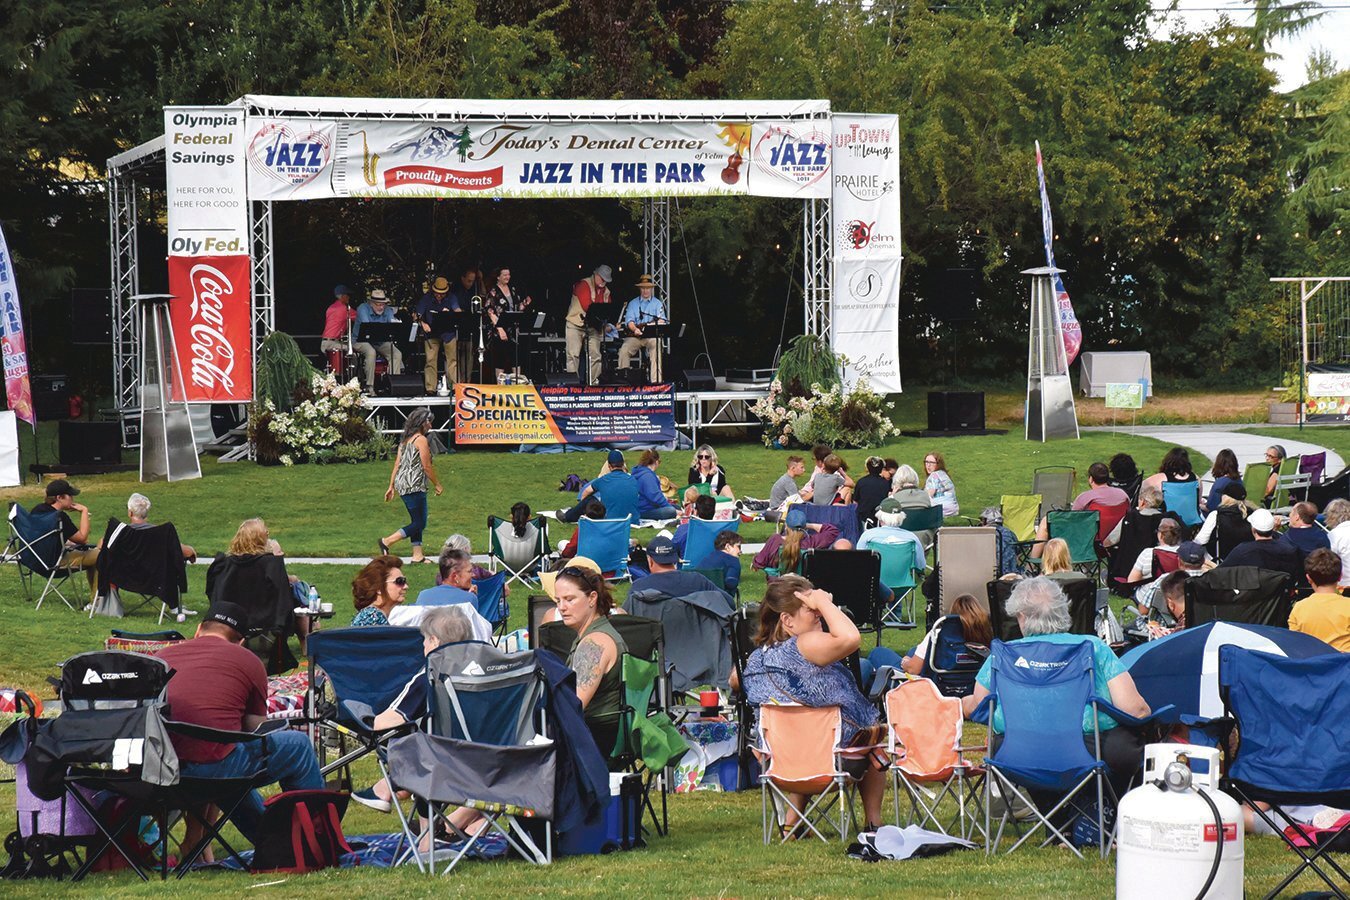 Last year’s Jazz in the Park event drew in large crowds to Yelm City Park.